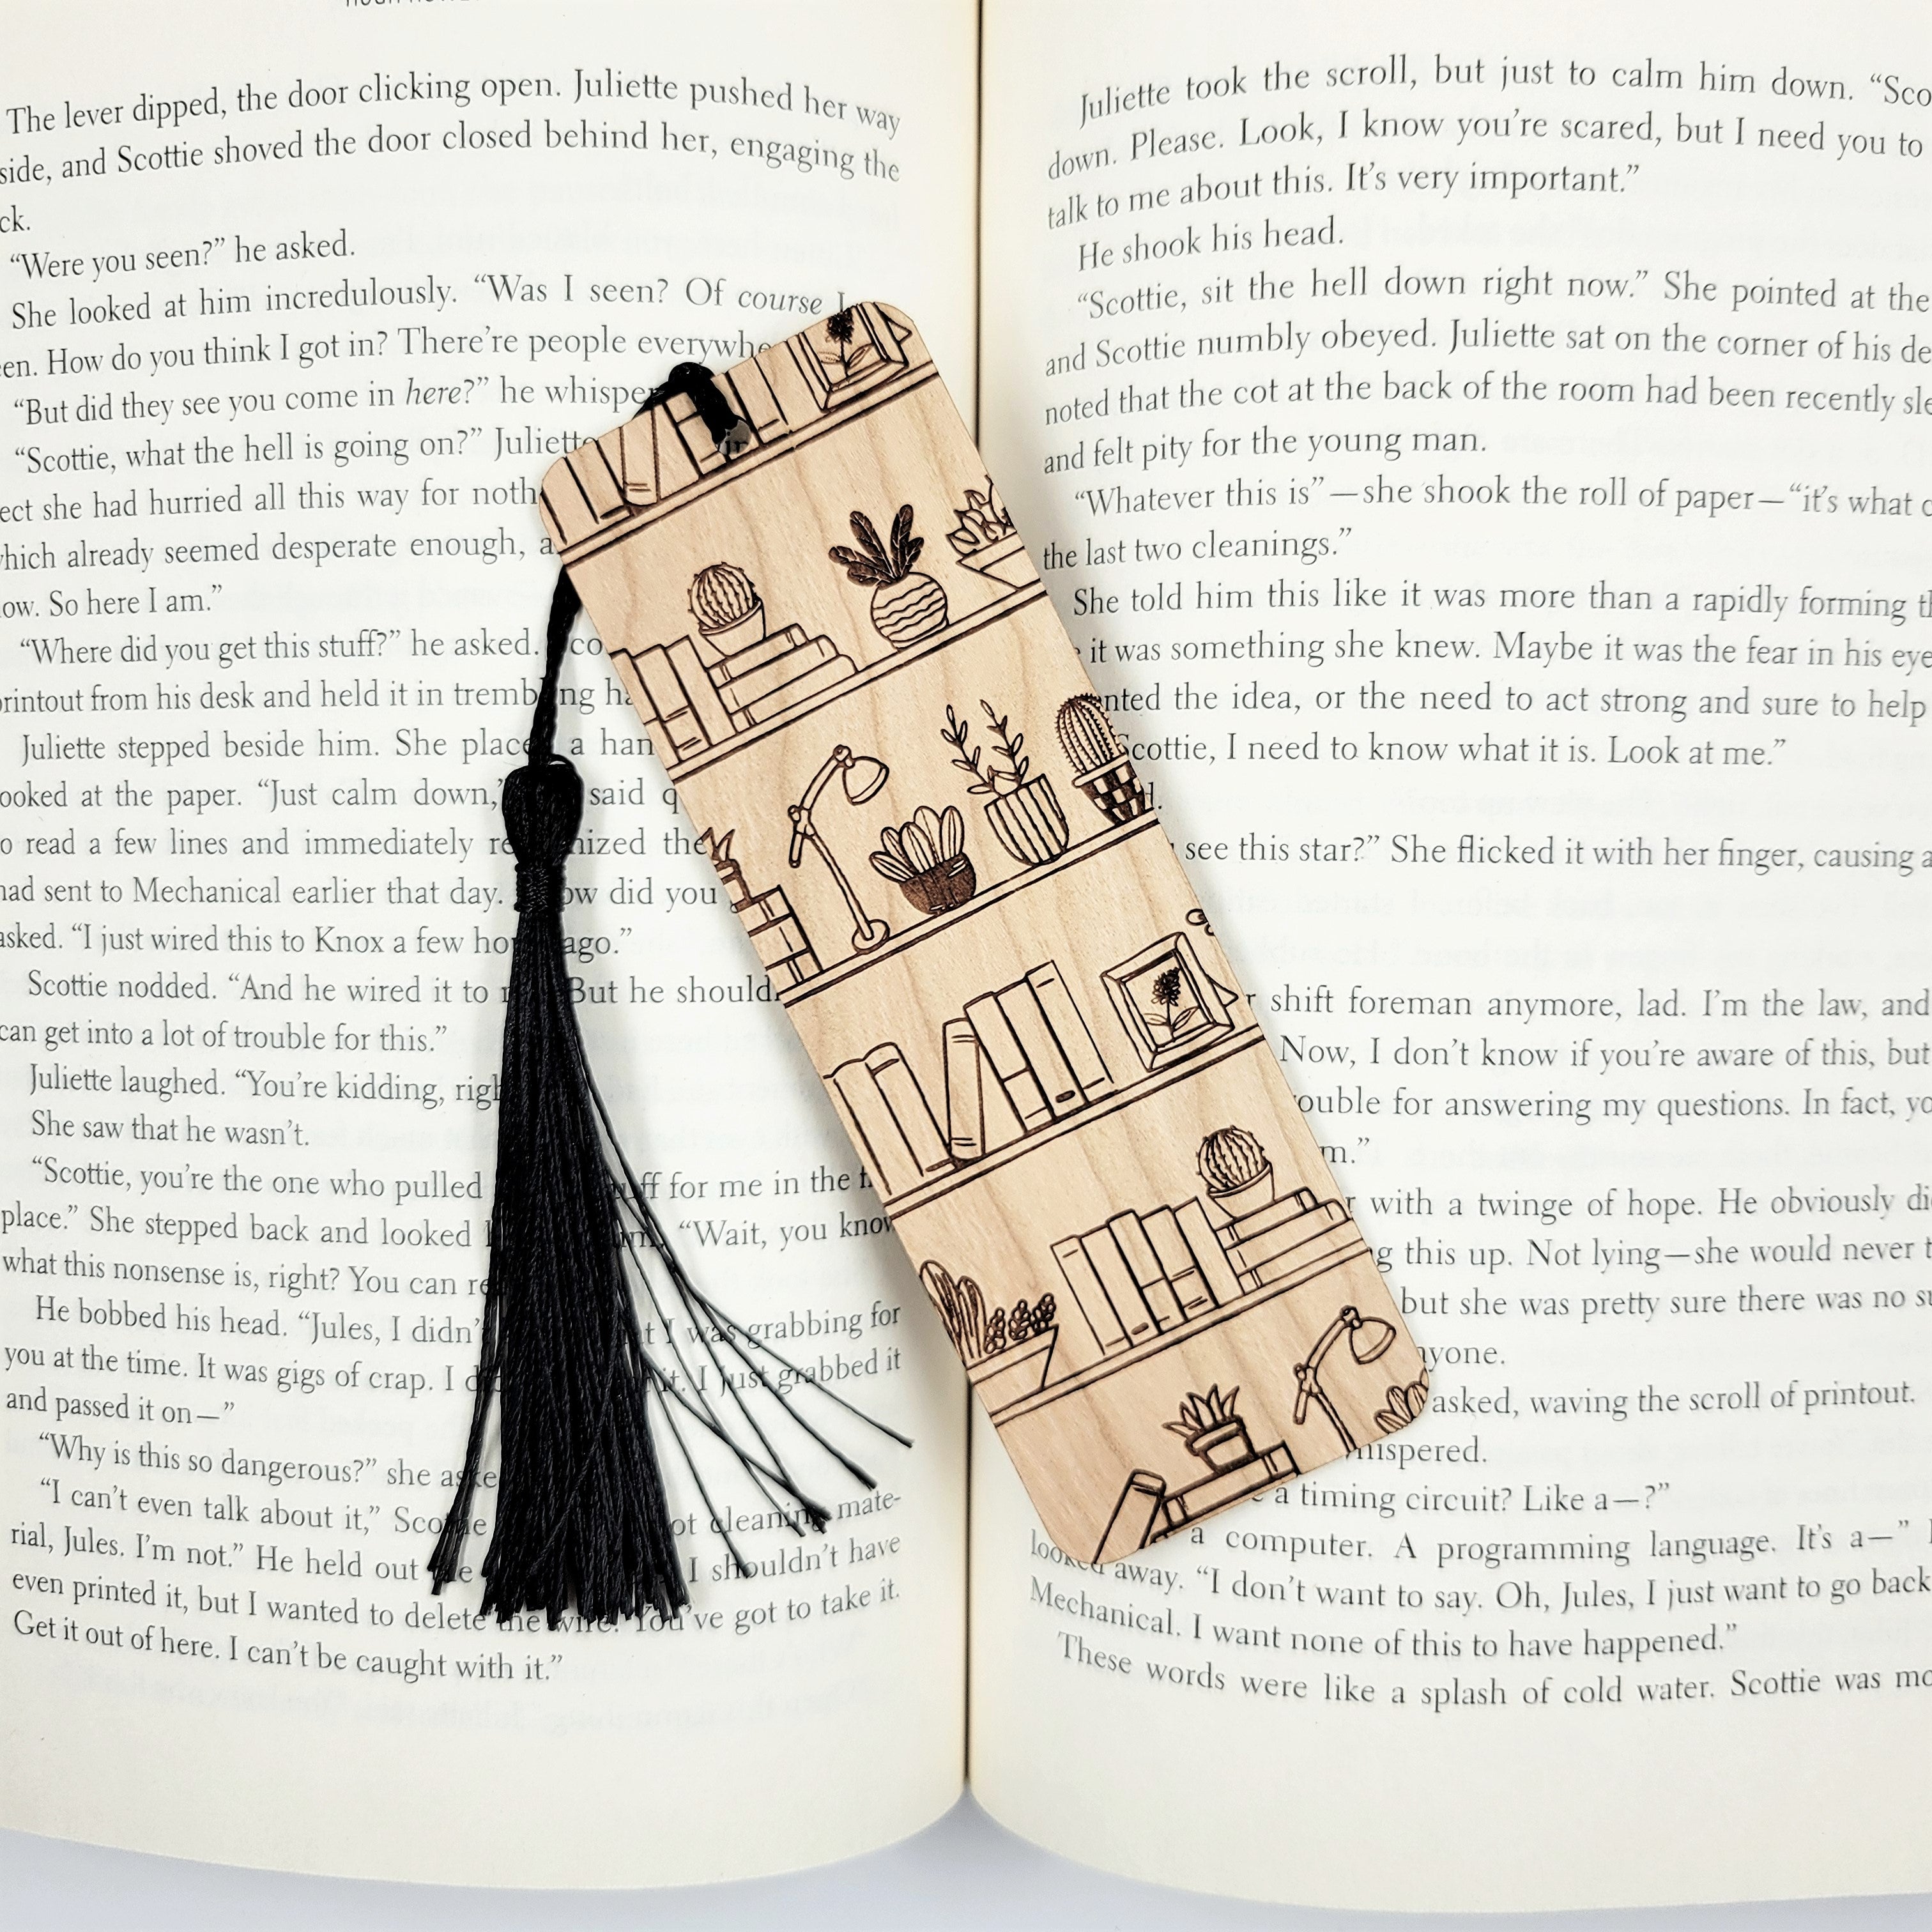 No shelf control wooden bookmark – Bumble and Birch - Stationery